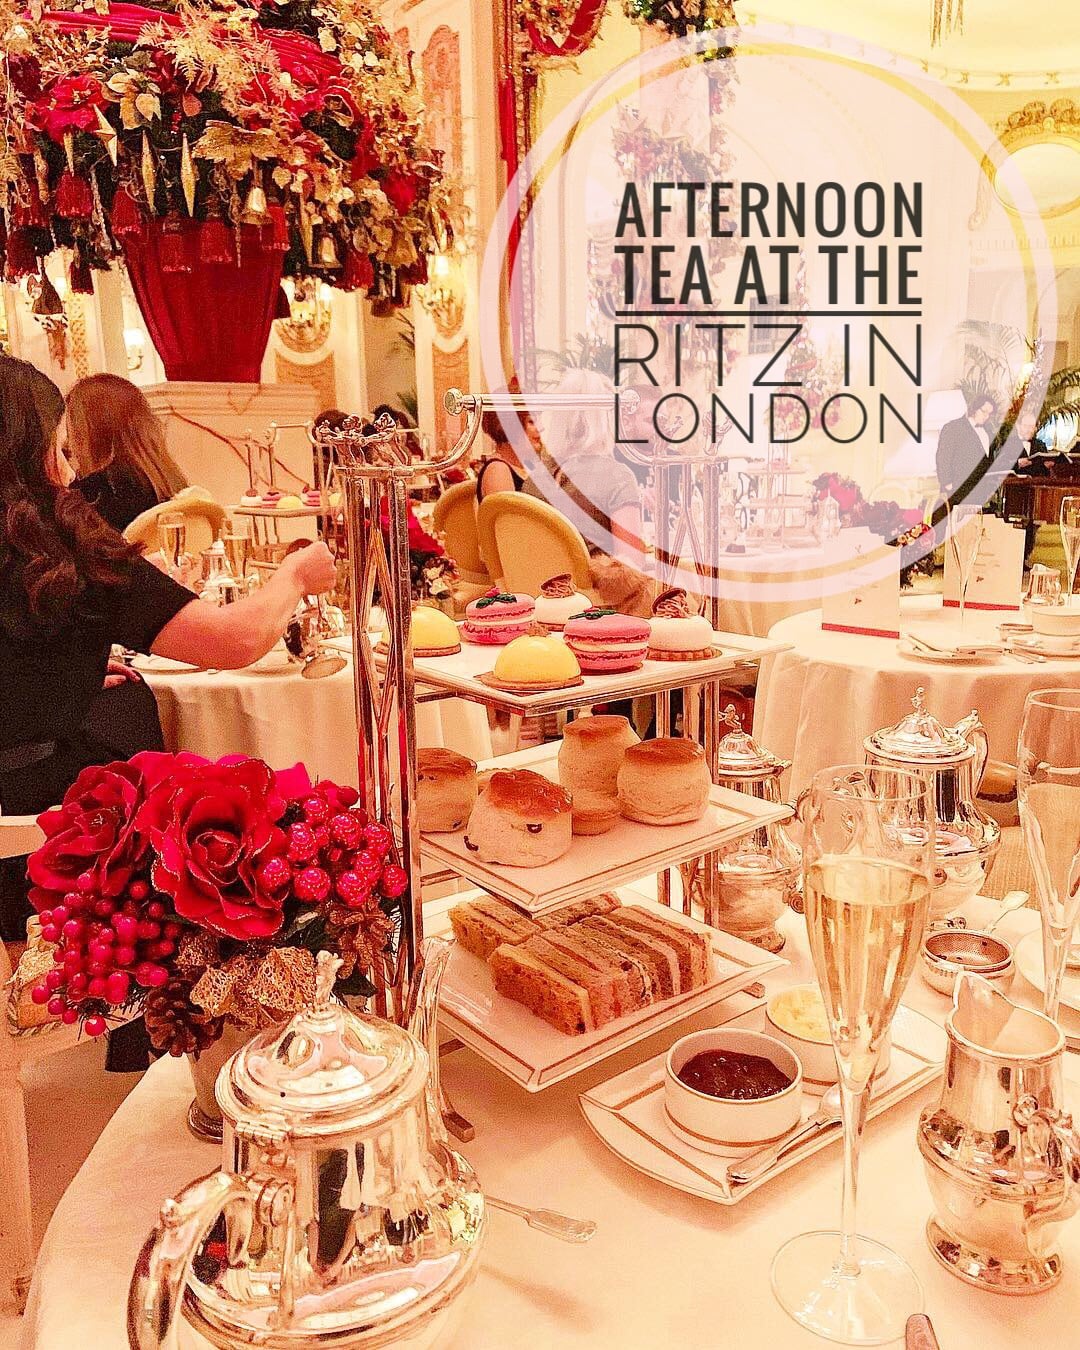 My Christmas Afternoon Tea experience at The Ritz in London